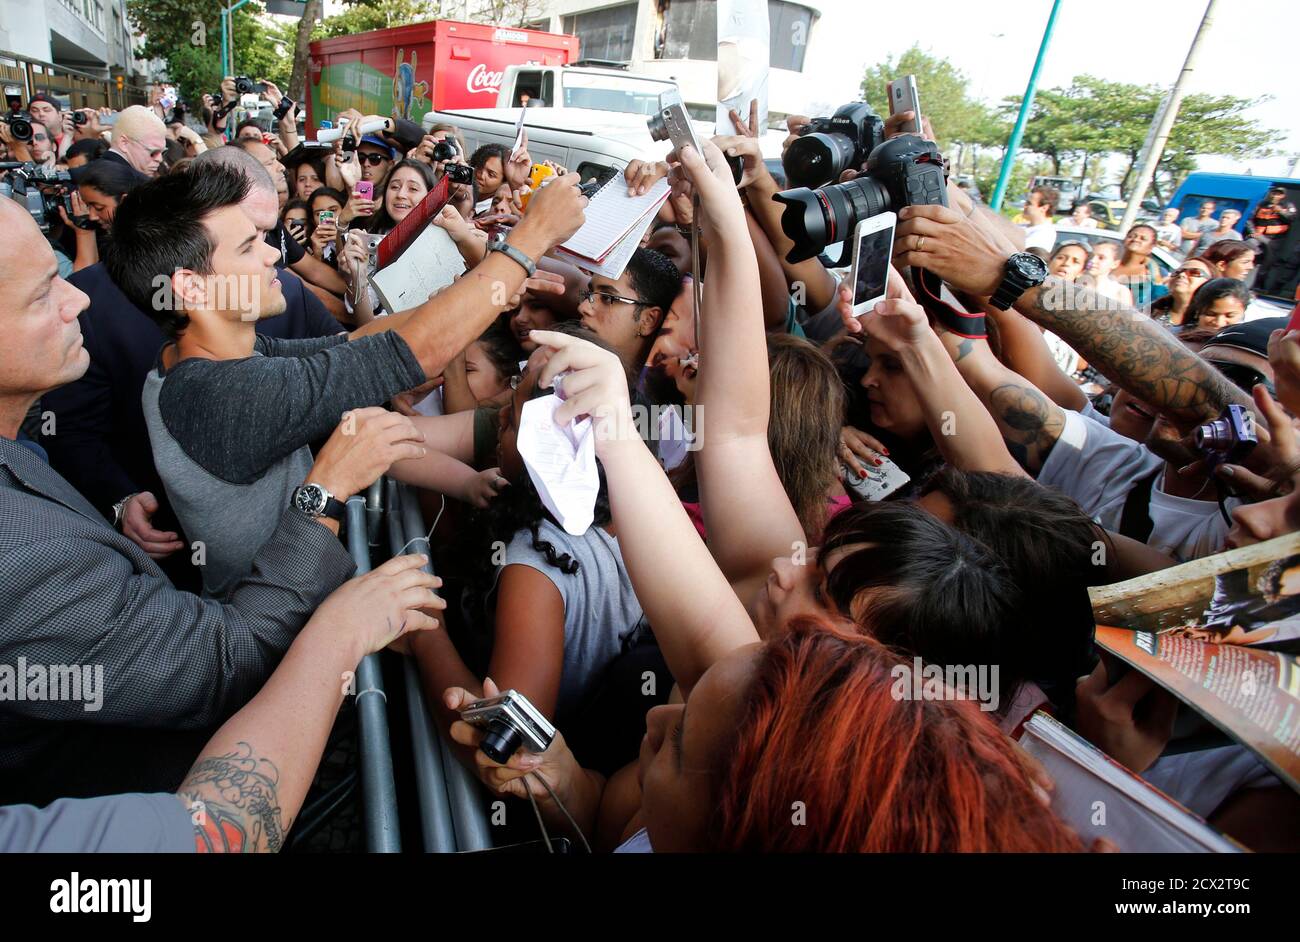 U.S. actor Taylor Lautner signs autographs for fans at a launch of the film 'A saga crepusculo: Amanhecer' (The Twilight Saga - Breaking Dawn) in Rio de Janeiro October 24, 2012. REUTERS/Sergio Moraes (BRAZIL - Tags: ENTERTAINMENT) Stock Photo